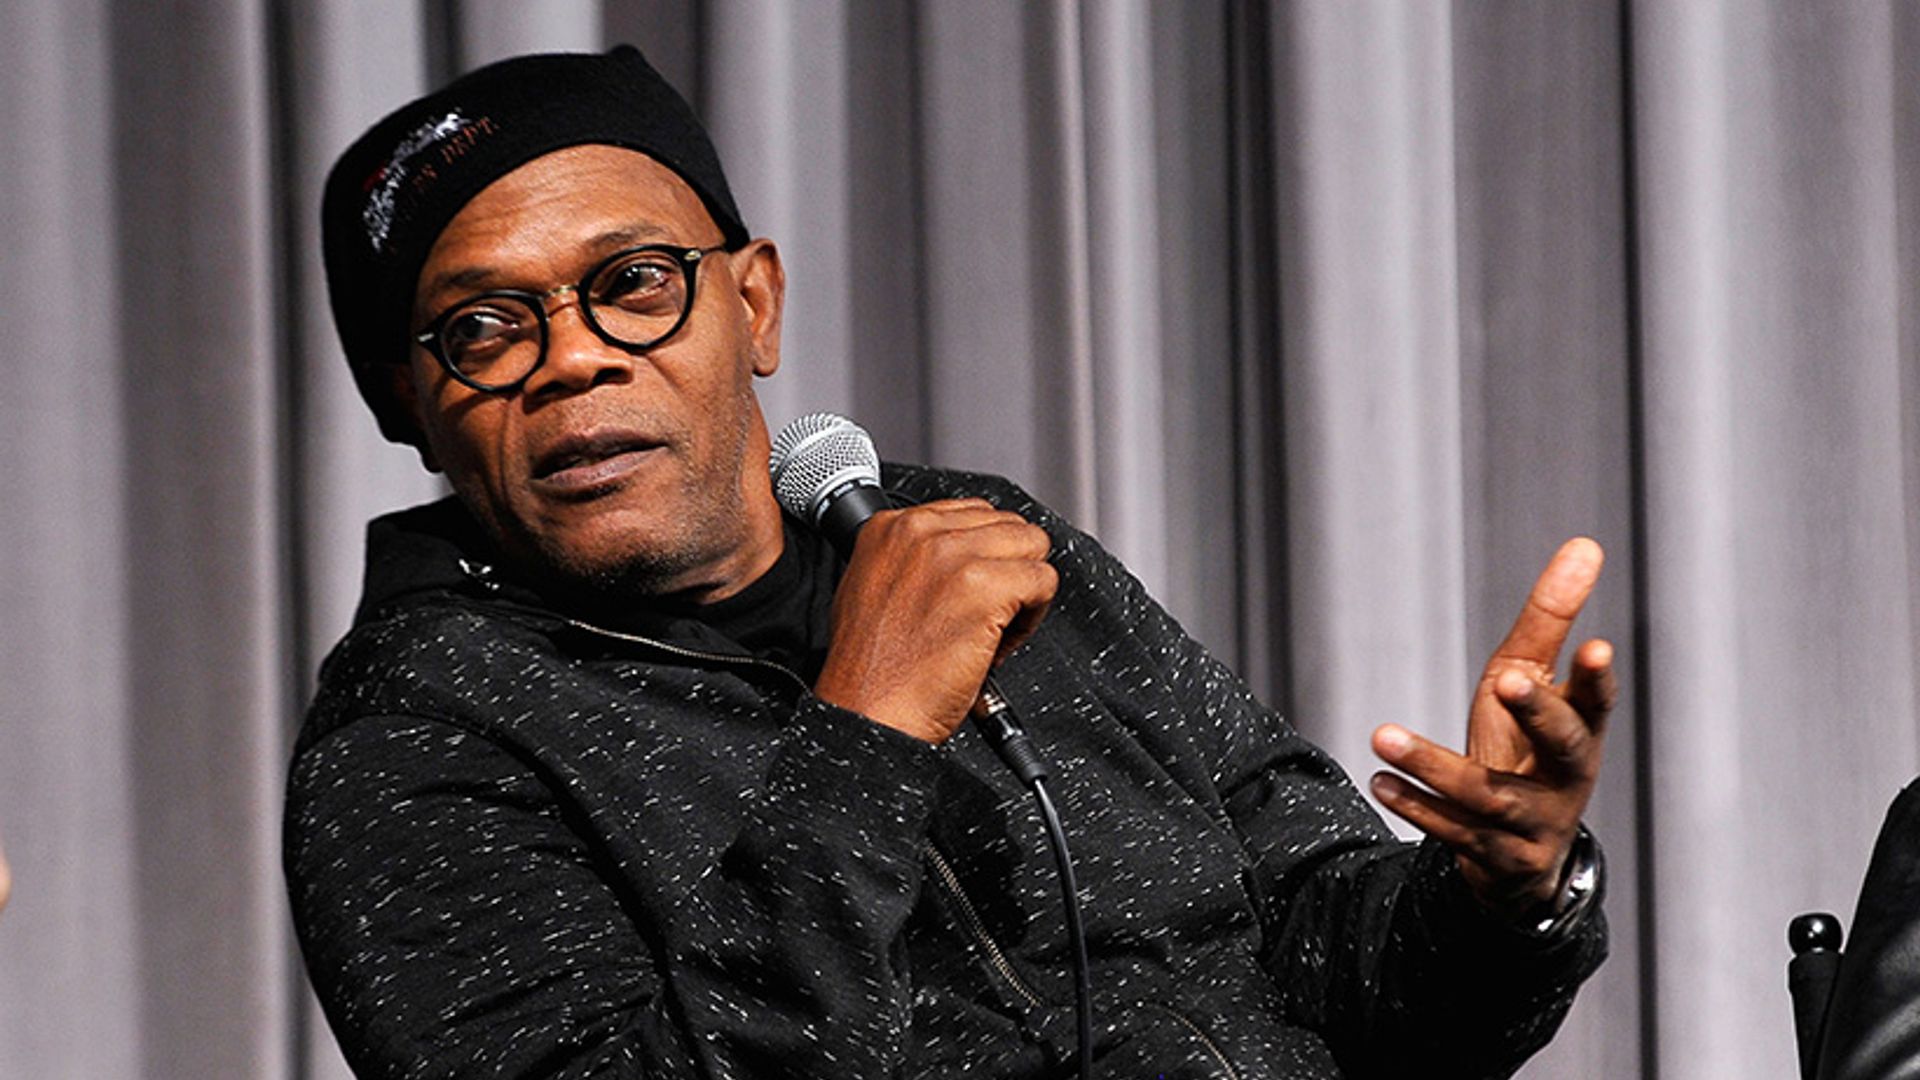 Samuel L. Jackson makes surprising comments about Brad and Angelina's split